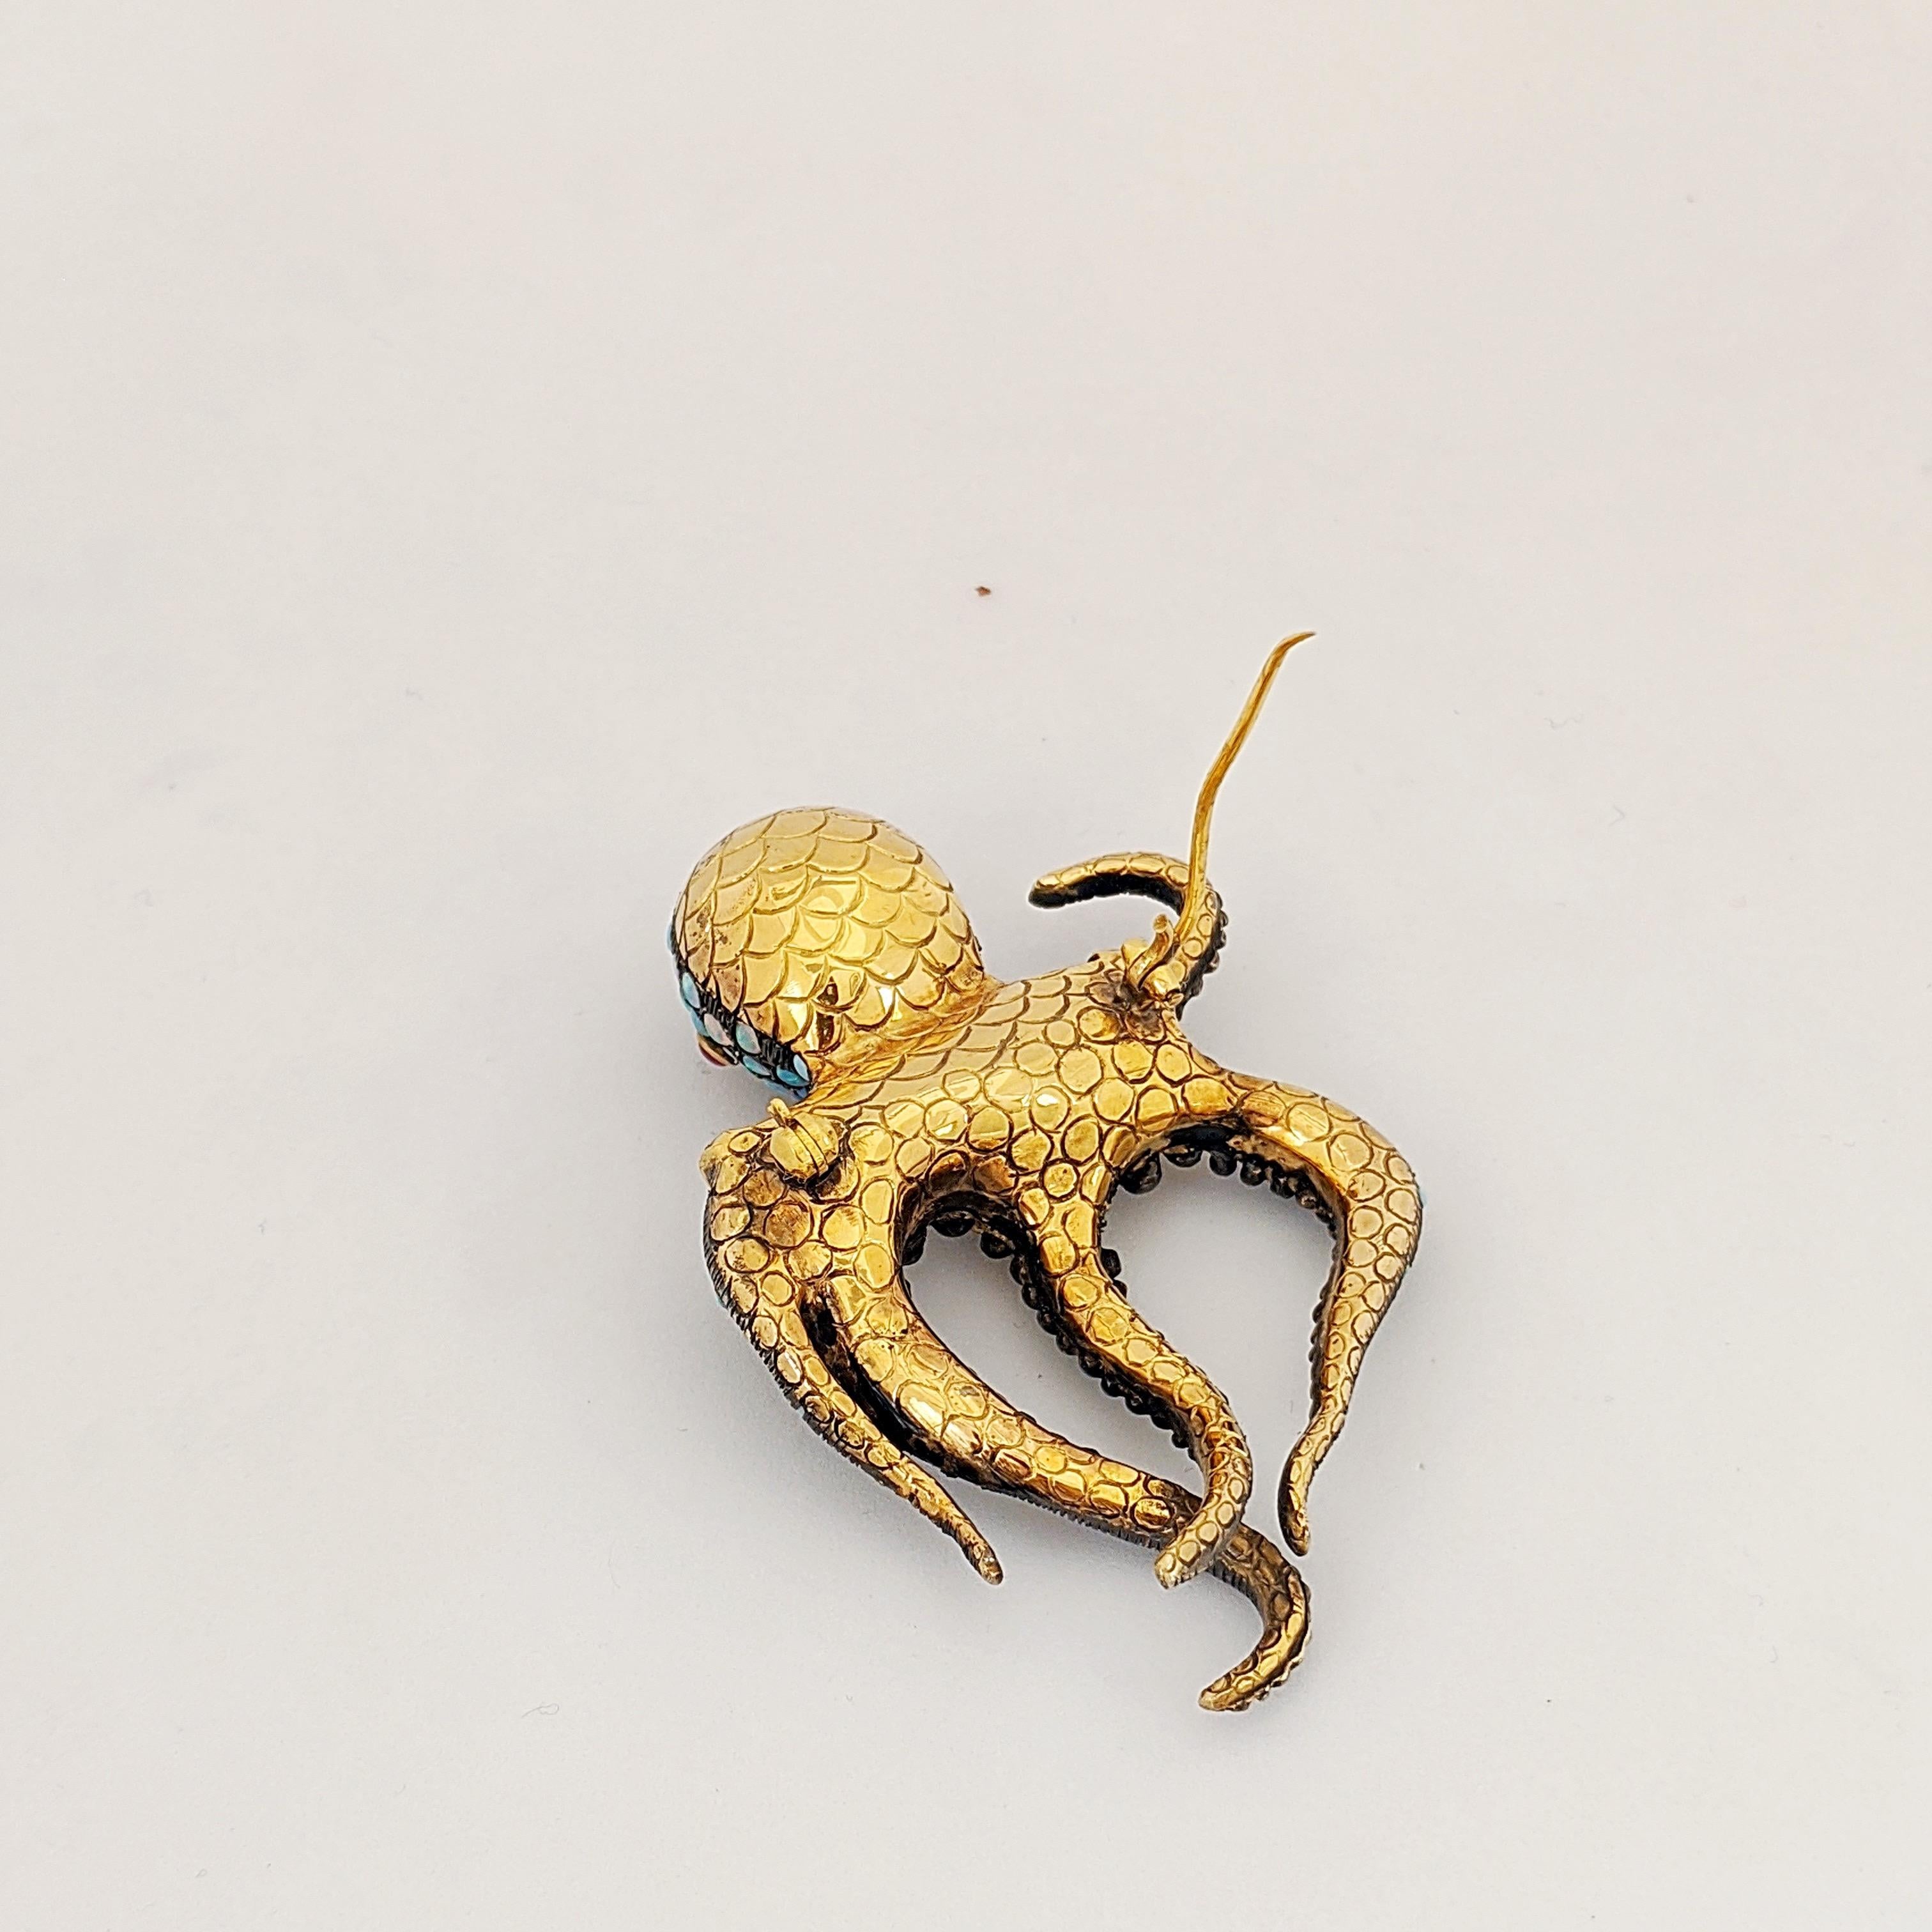 A whimsical Octopus brooch .
This beautiful brooch is crafted by Irlan in a combination of 18 karat yellow gold and sterling silver. The entire front of the  Octopus is set with round opals. He has a sash of Diamonds and Ruby eyes.  He measures 2.5